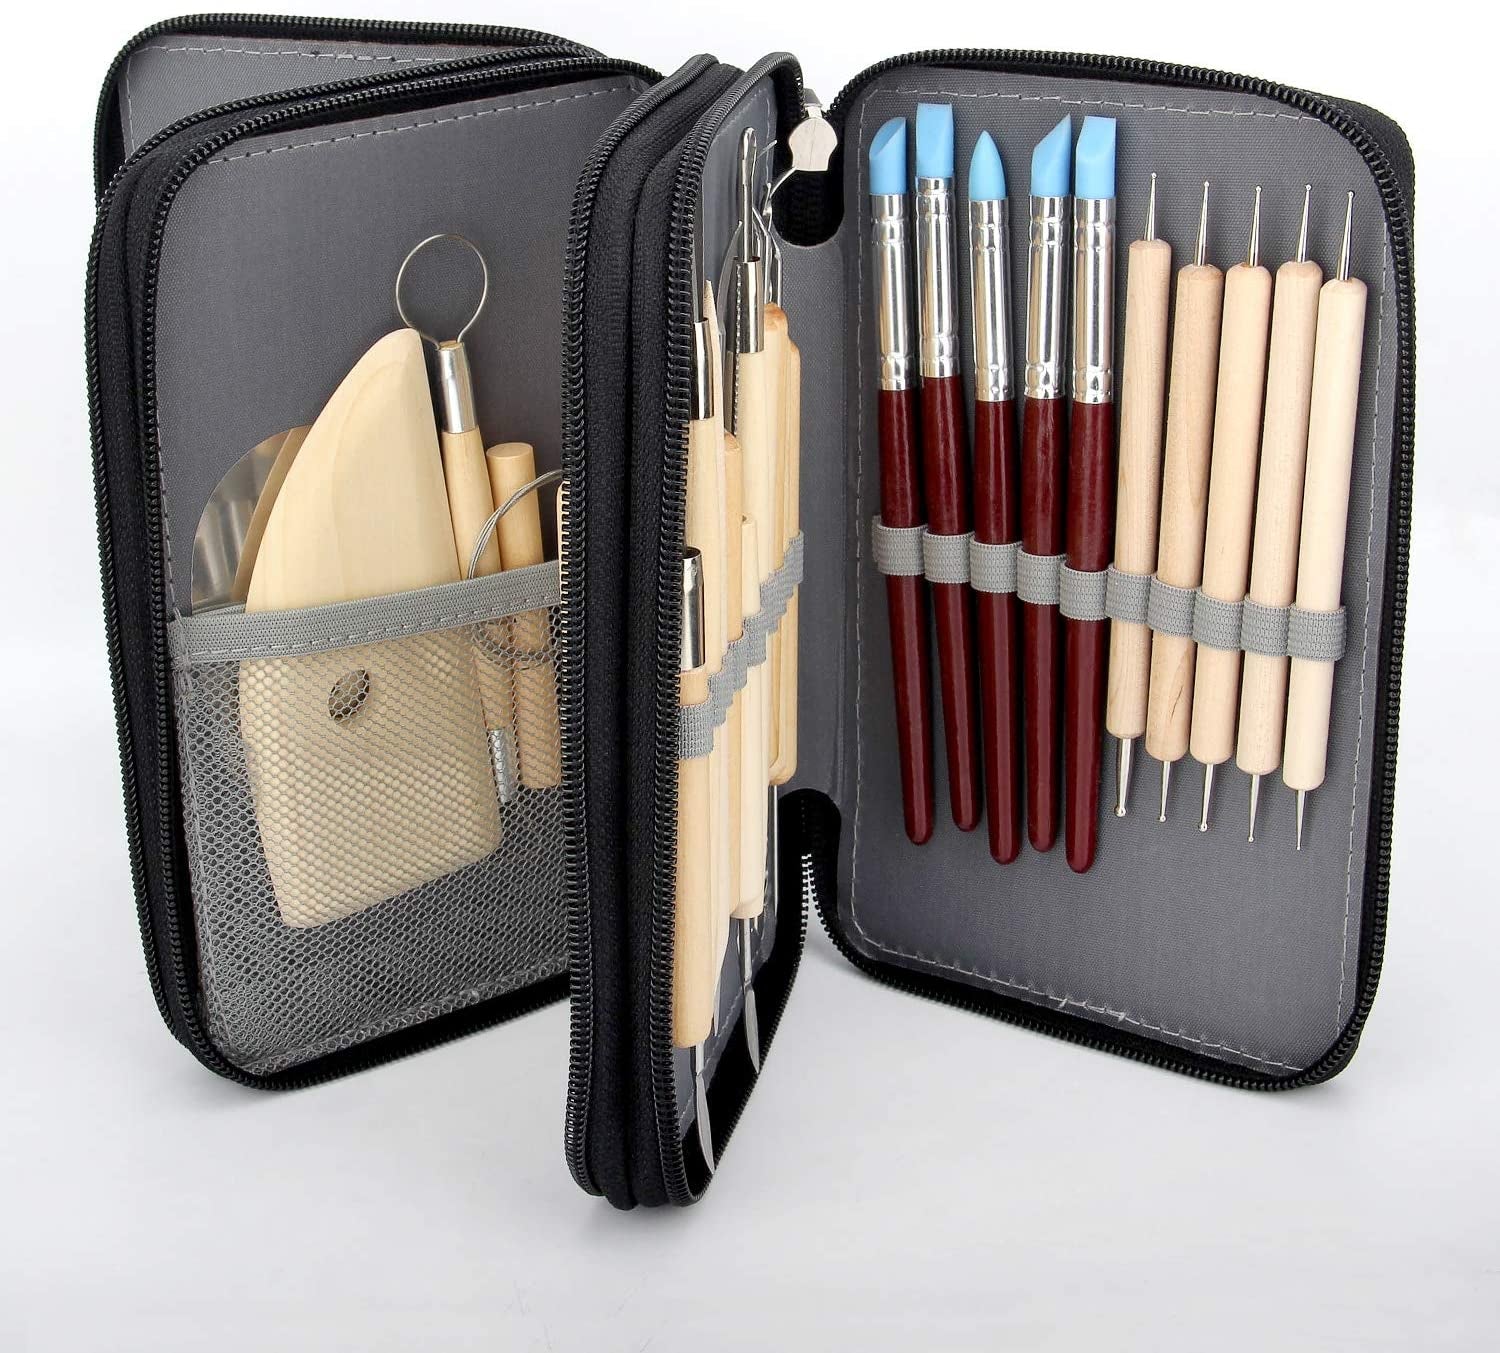 42-Piece Clay Sculpting Tool Kit - Wooden Handle Pottery Carving Tool Set | Comprehensive set for pottery, sculpting, and clay modeling